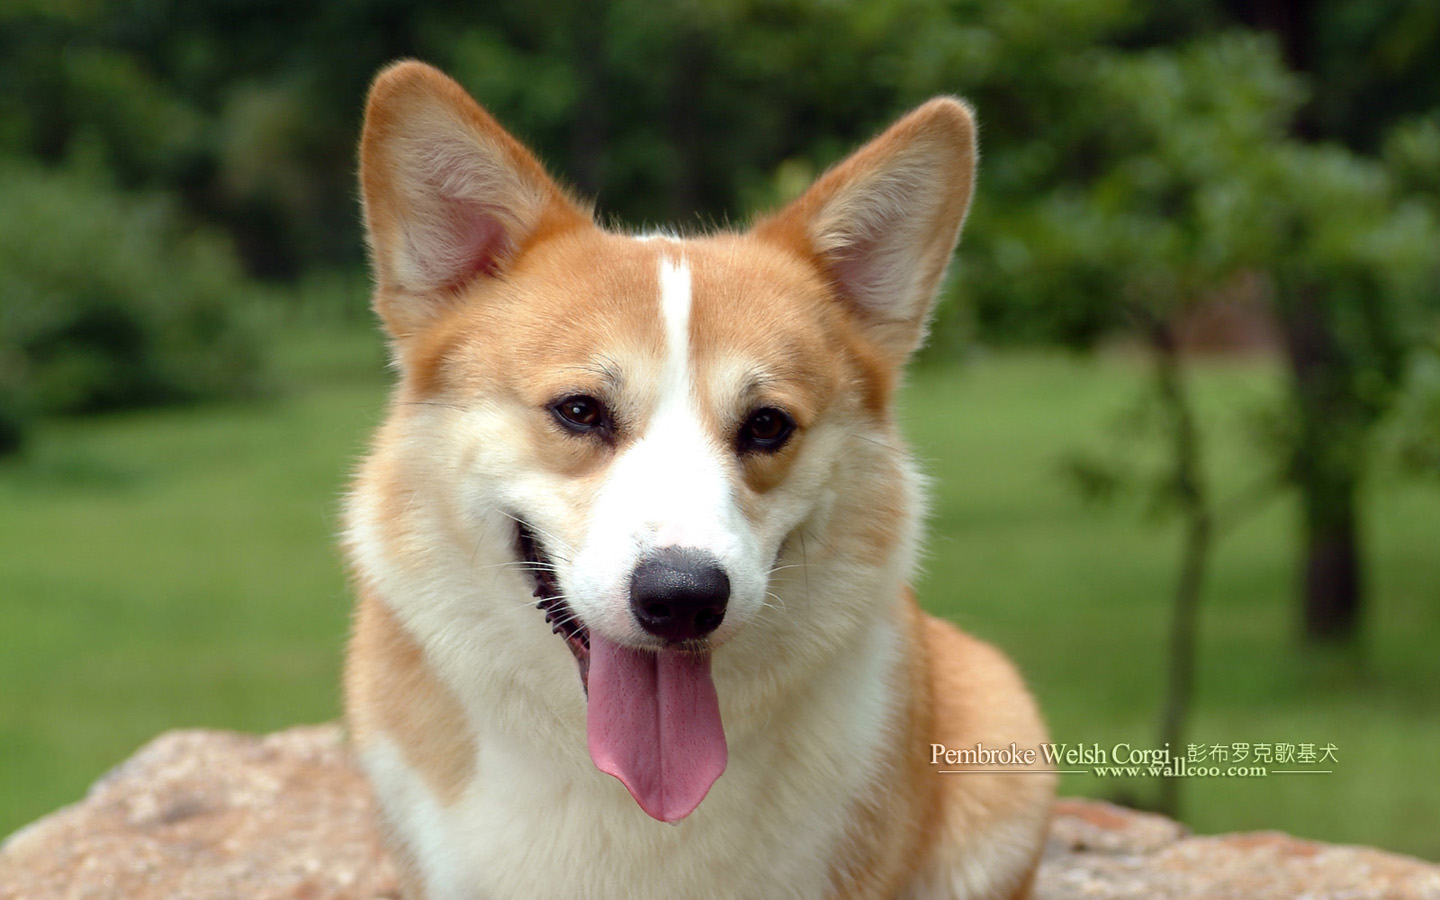 Pembroke Welsh Corgi Dogs And Puppies